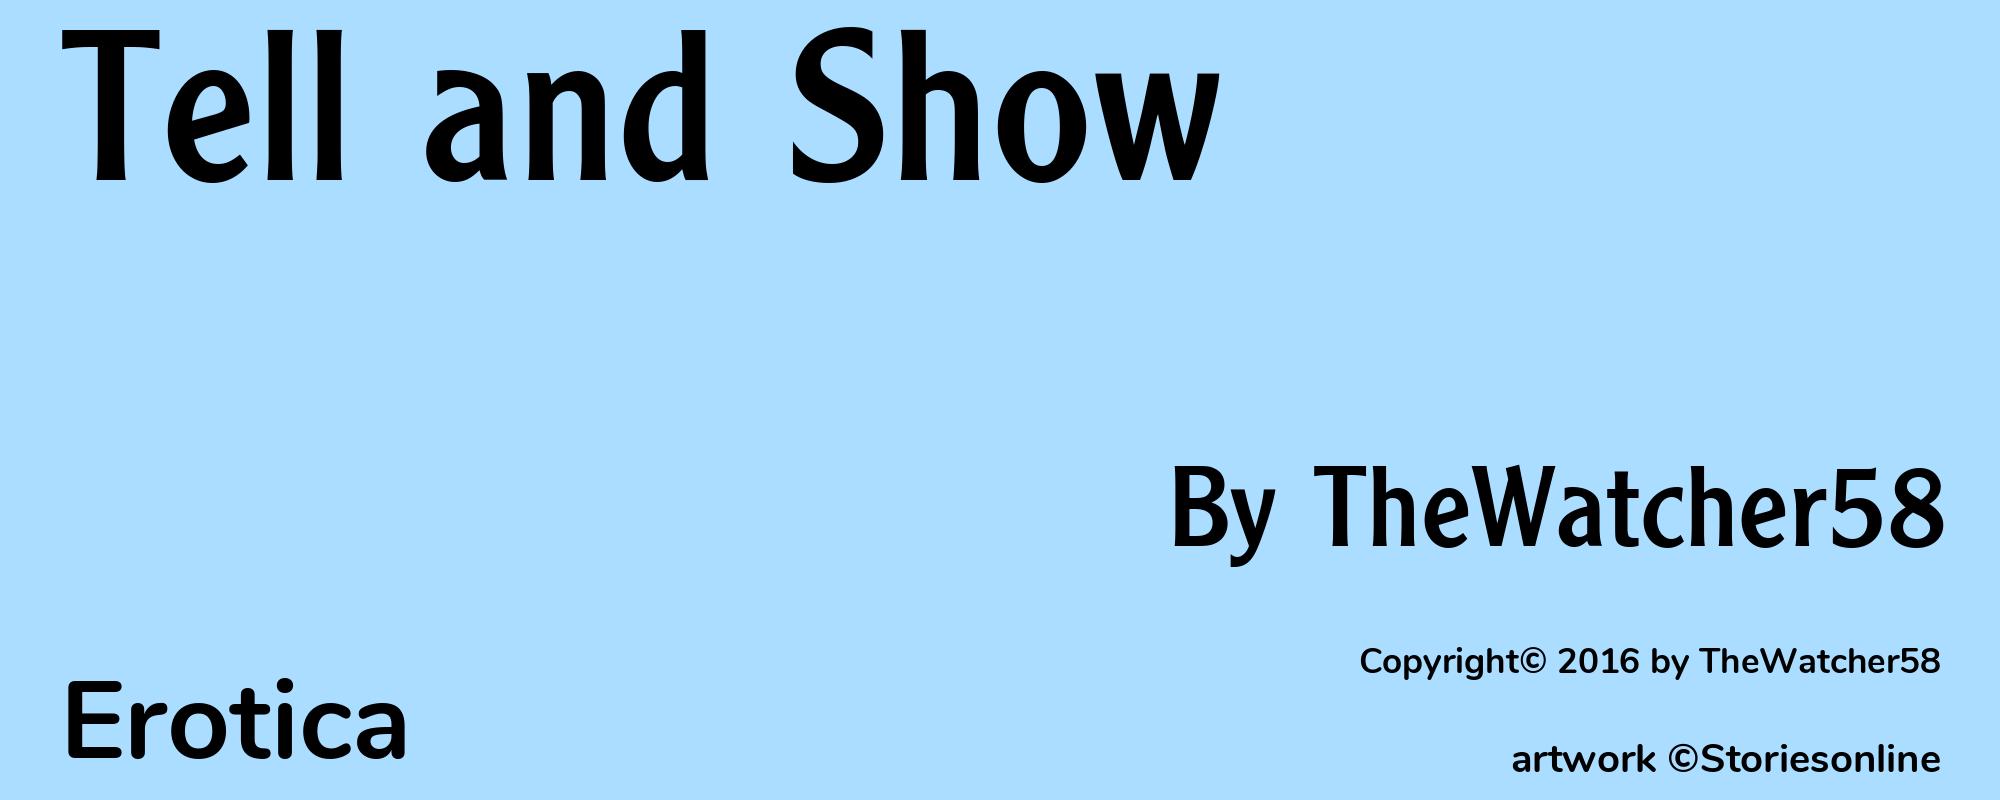 Tell and Show - Cover